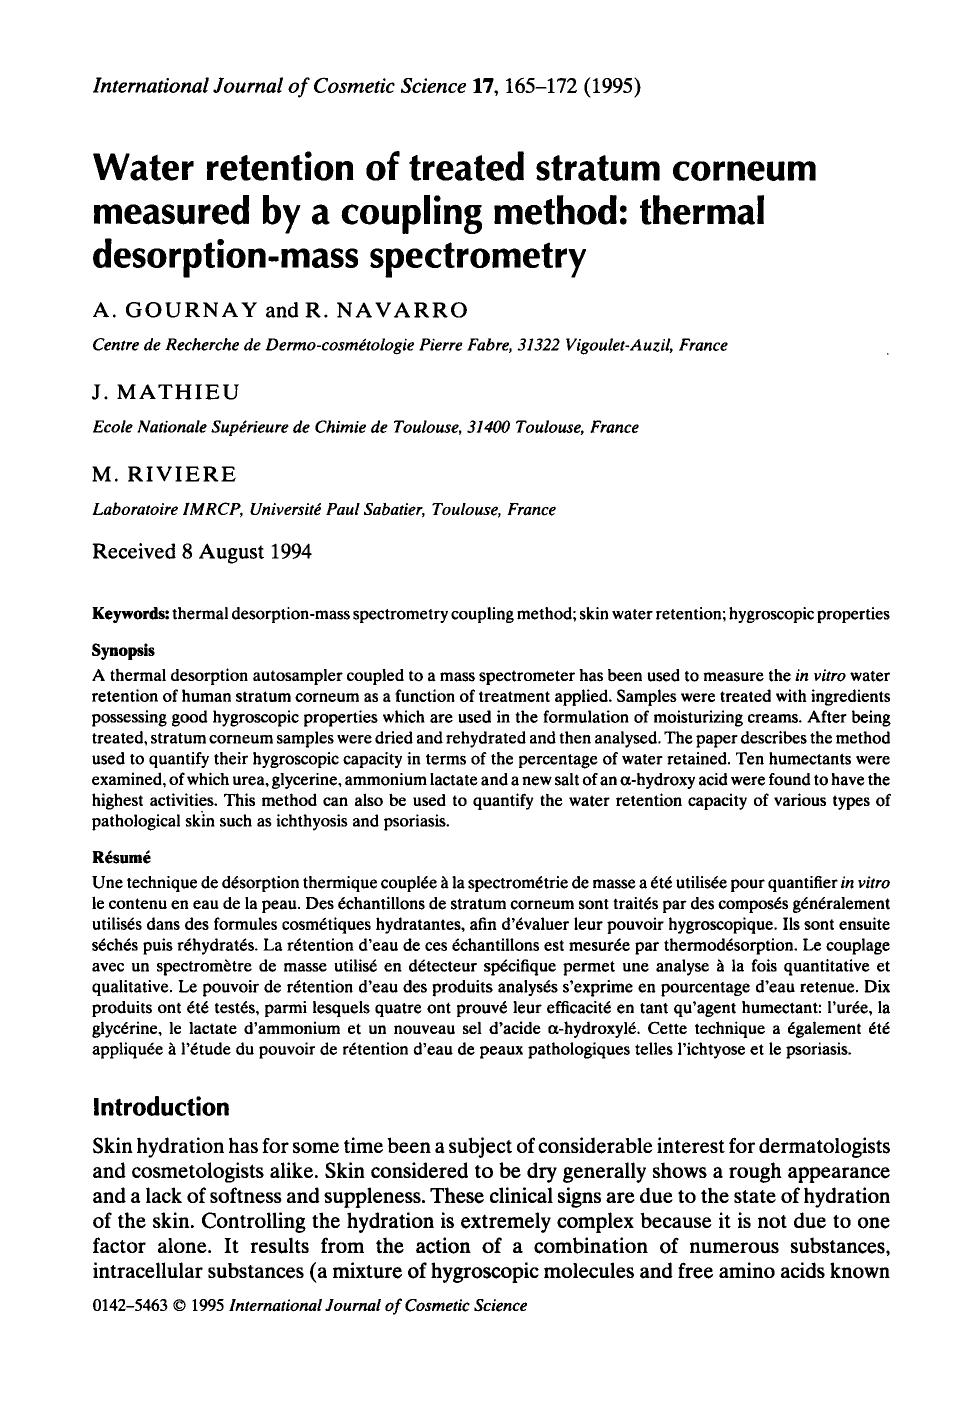 Water retention of treated stratum corneum measured by a coupling method: thermal desorption-mass spectrometry by Unknown